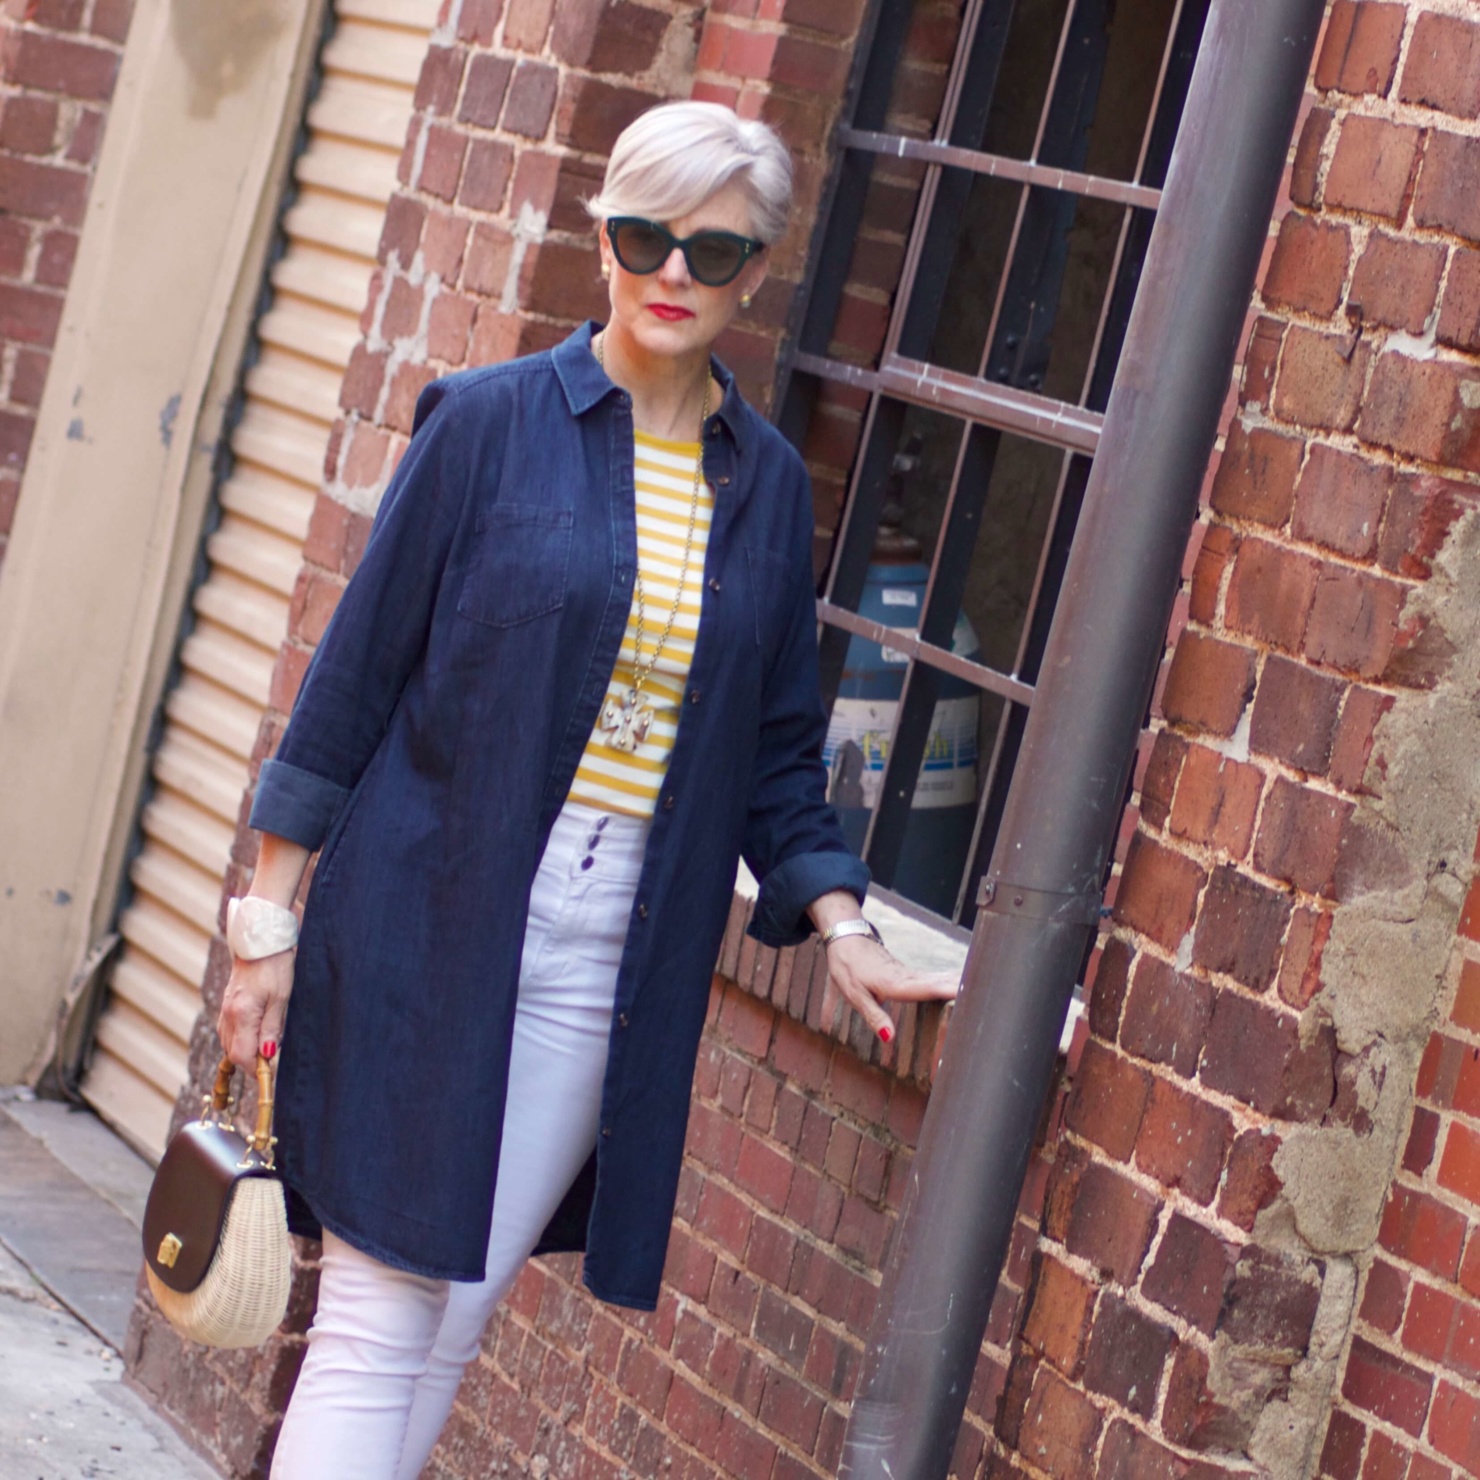 beth from Style at a Certain Age wears a denim duster, striped tee, white denim, suede sandals and wicker handbag